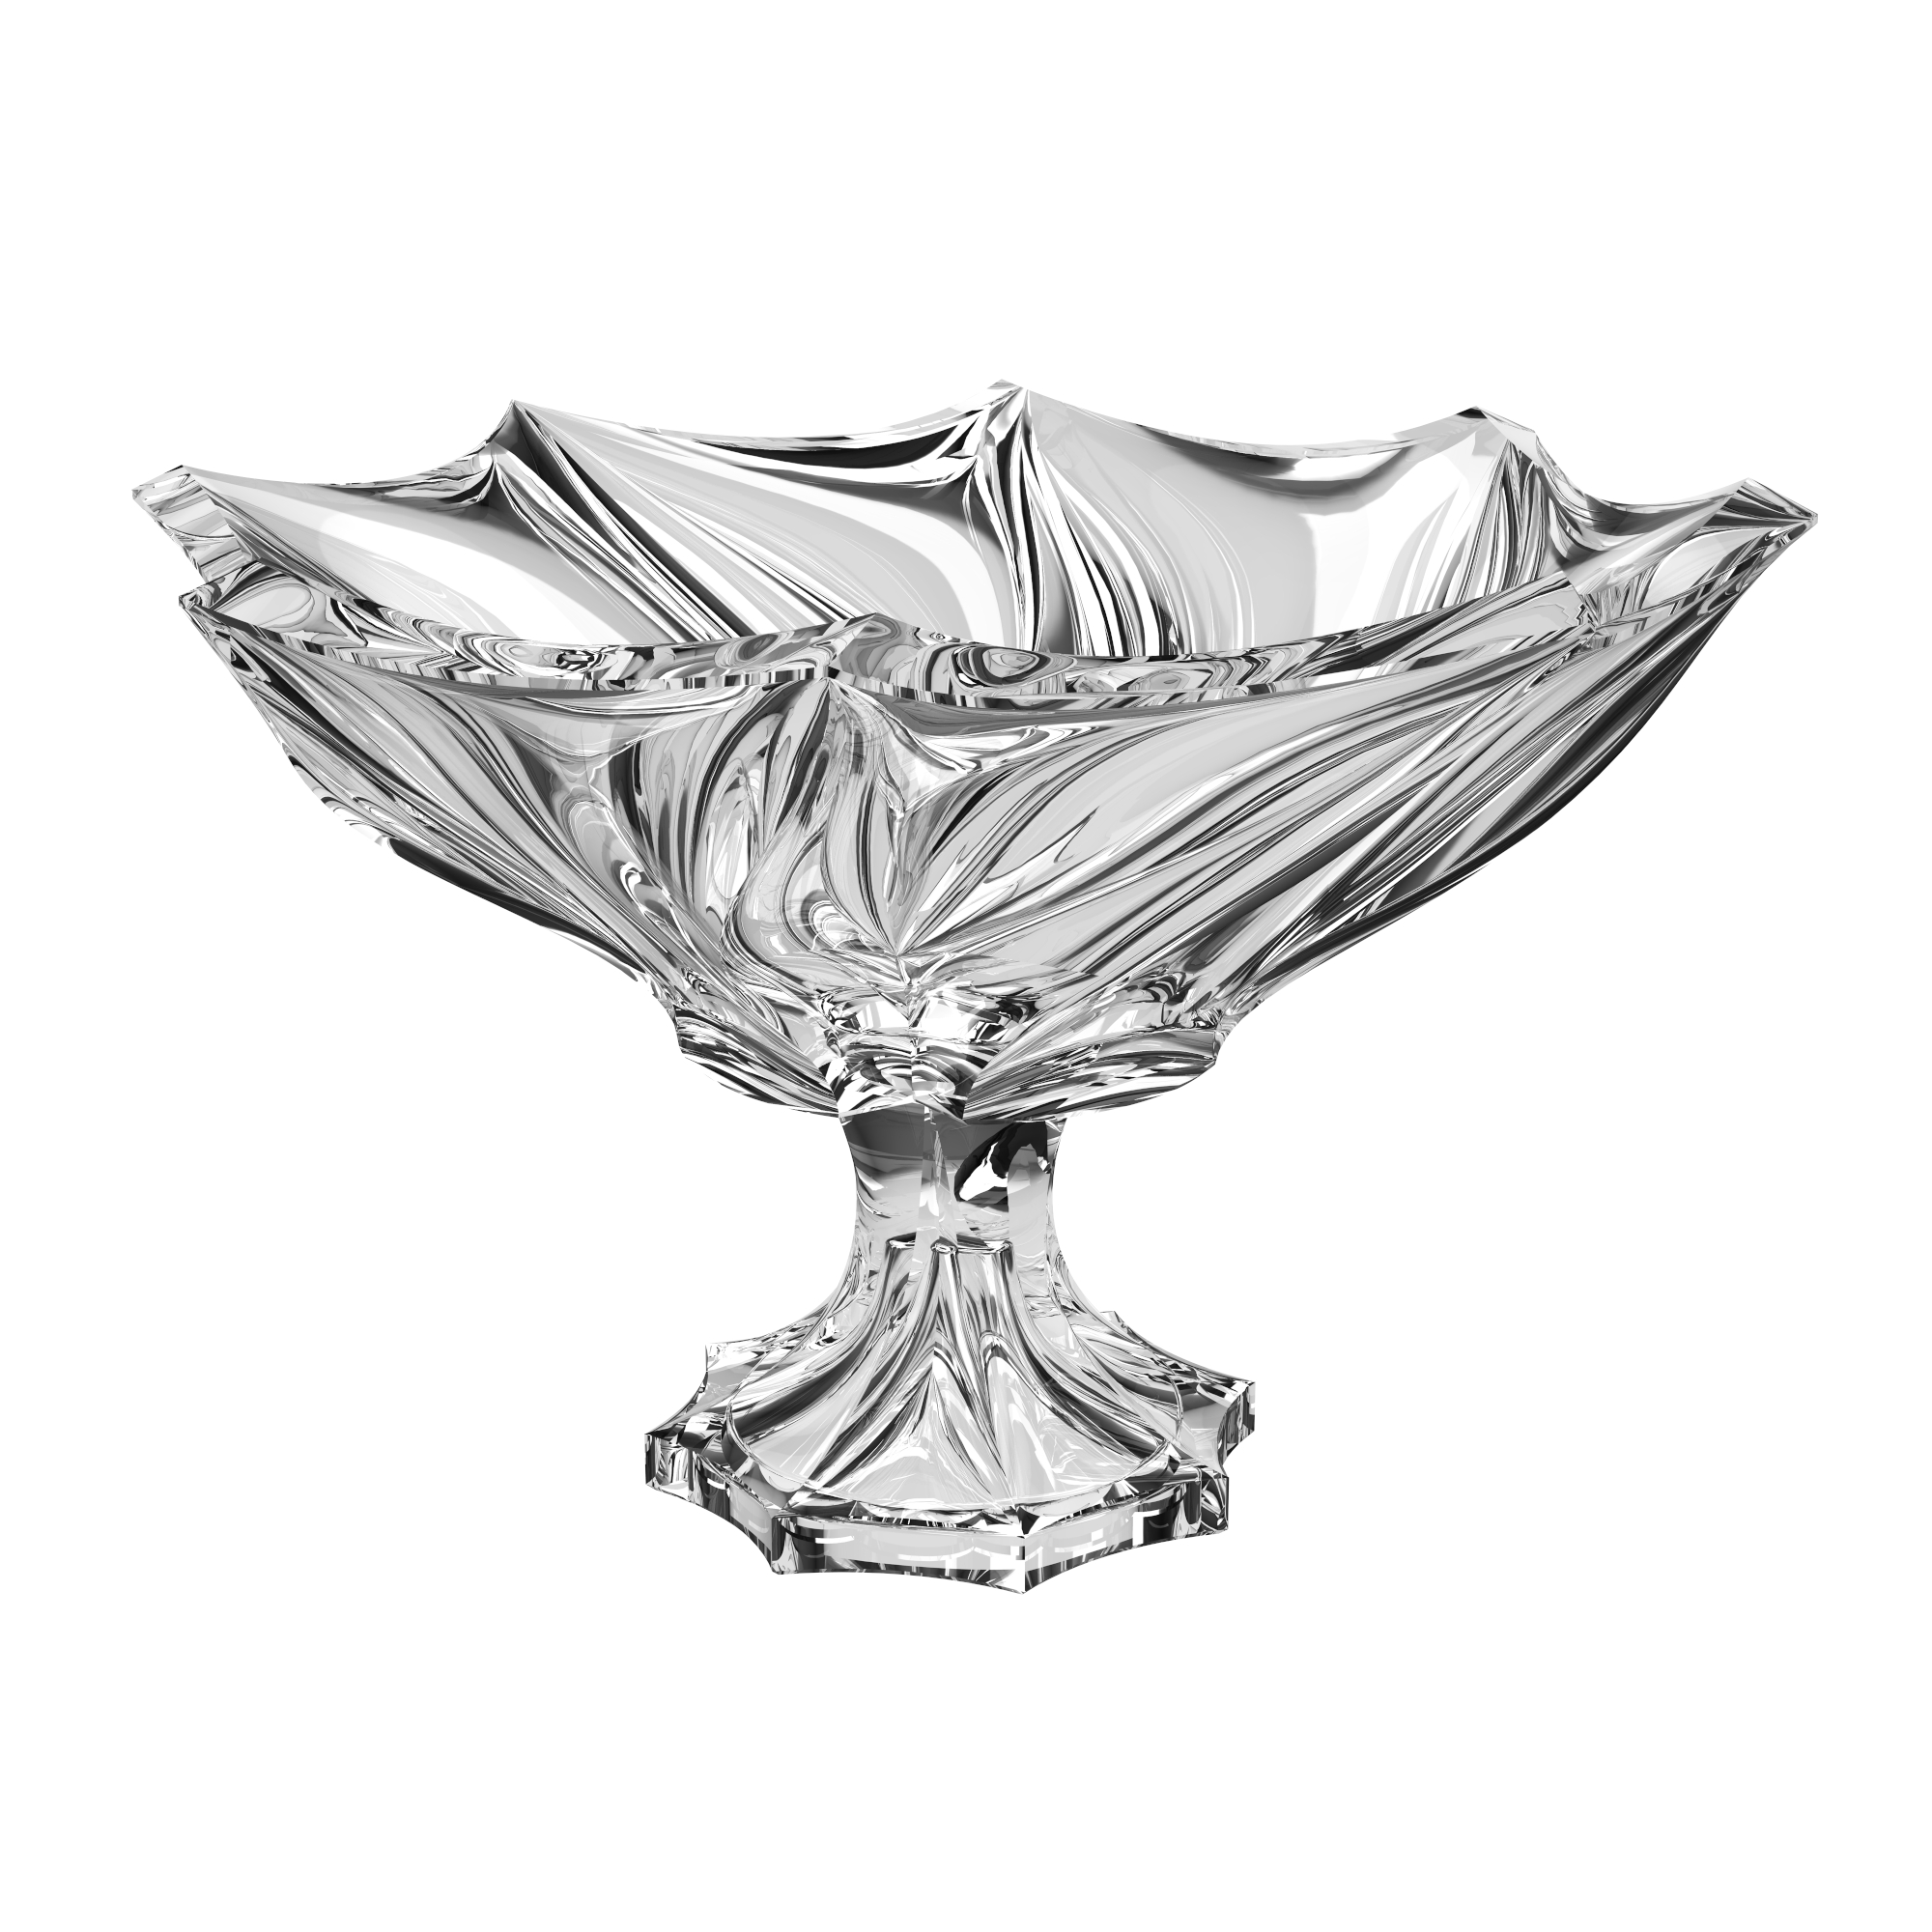 Bohemia Crystal, Footed Bowl – With A Past